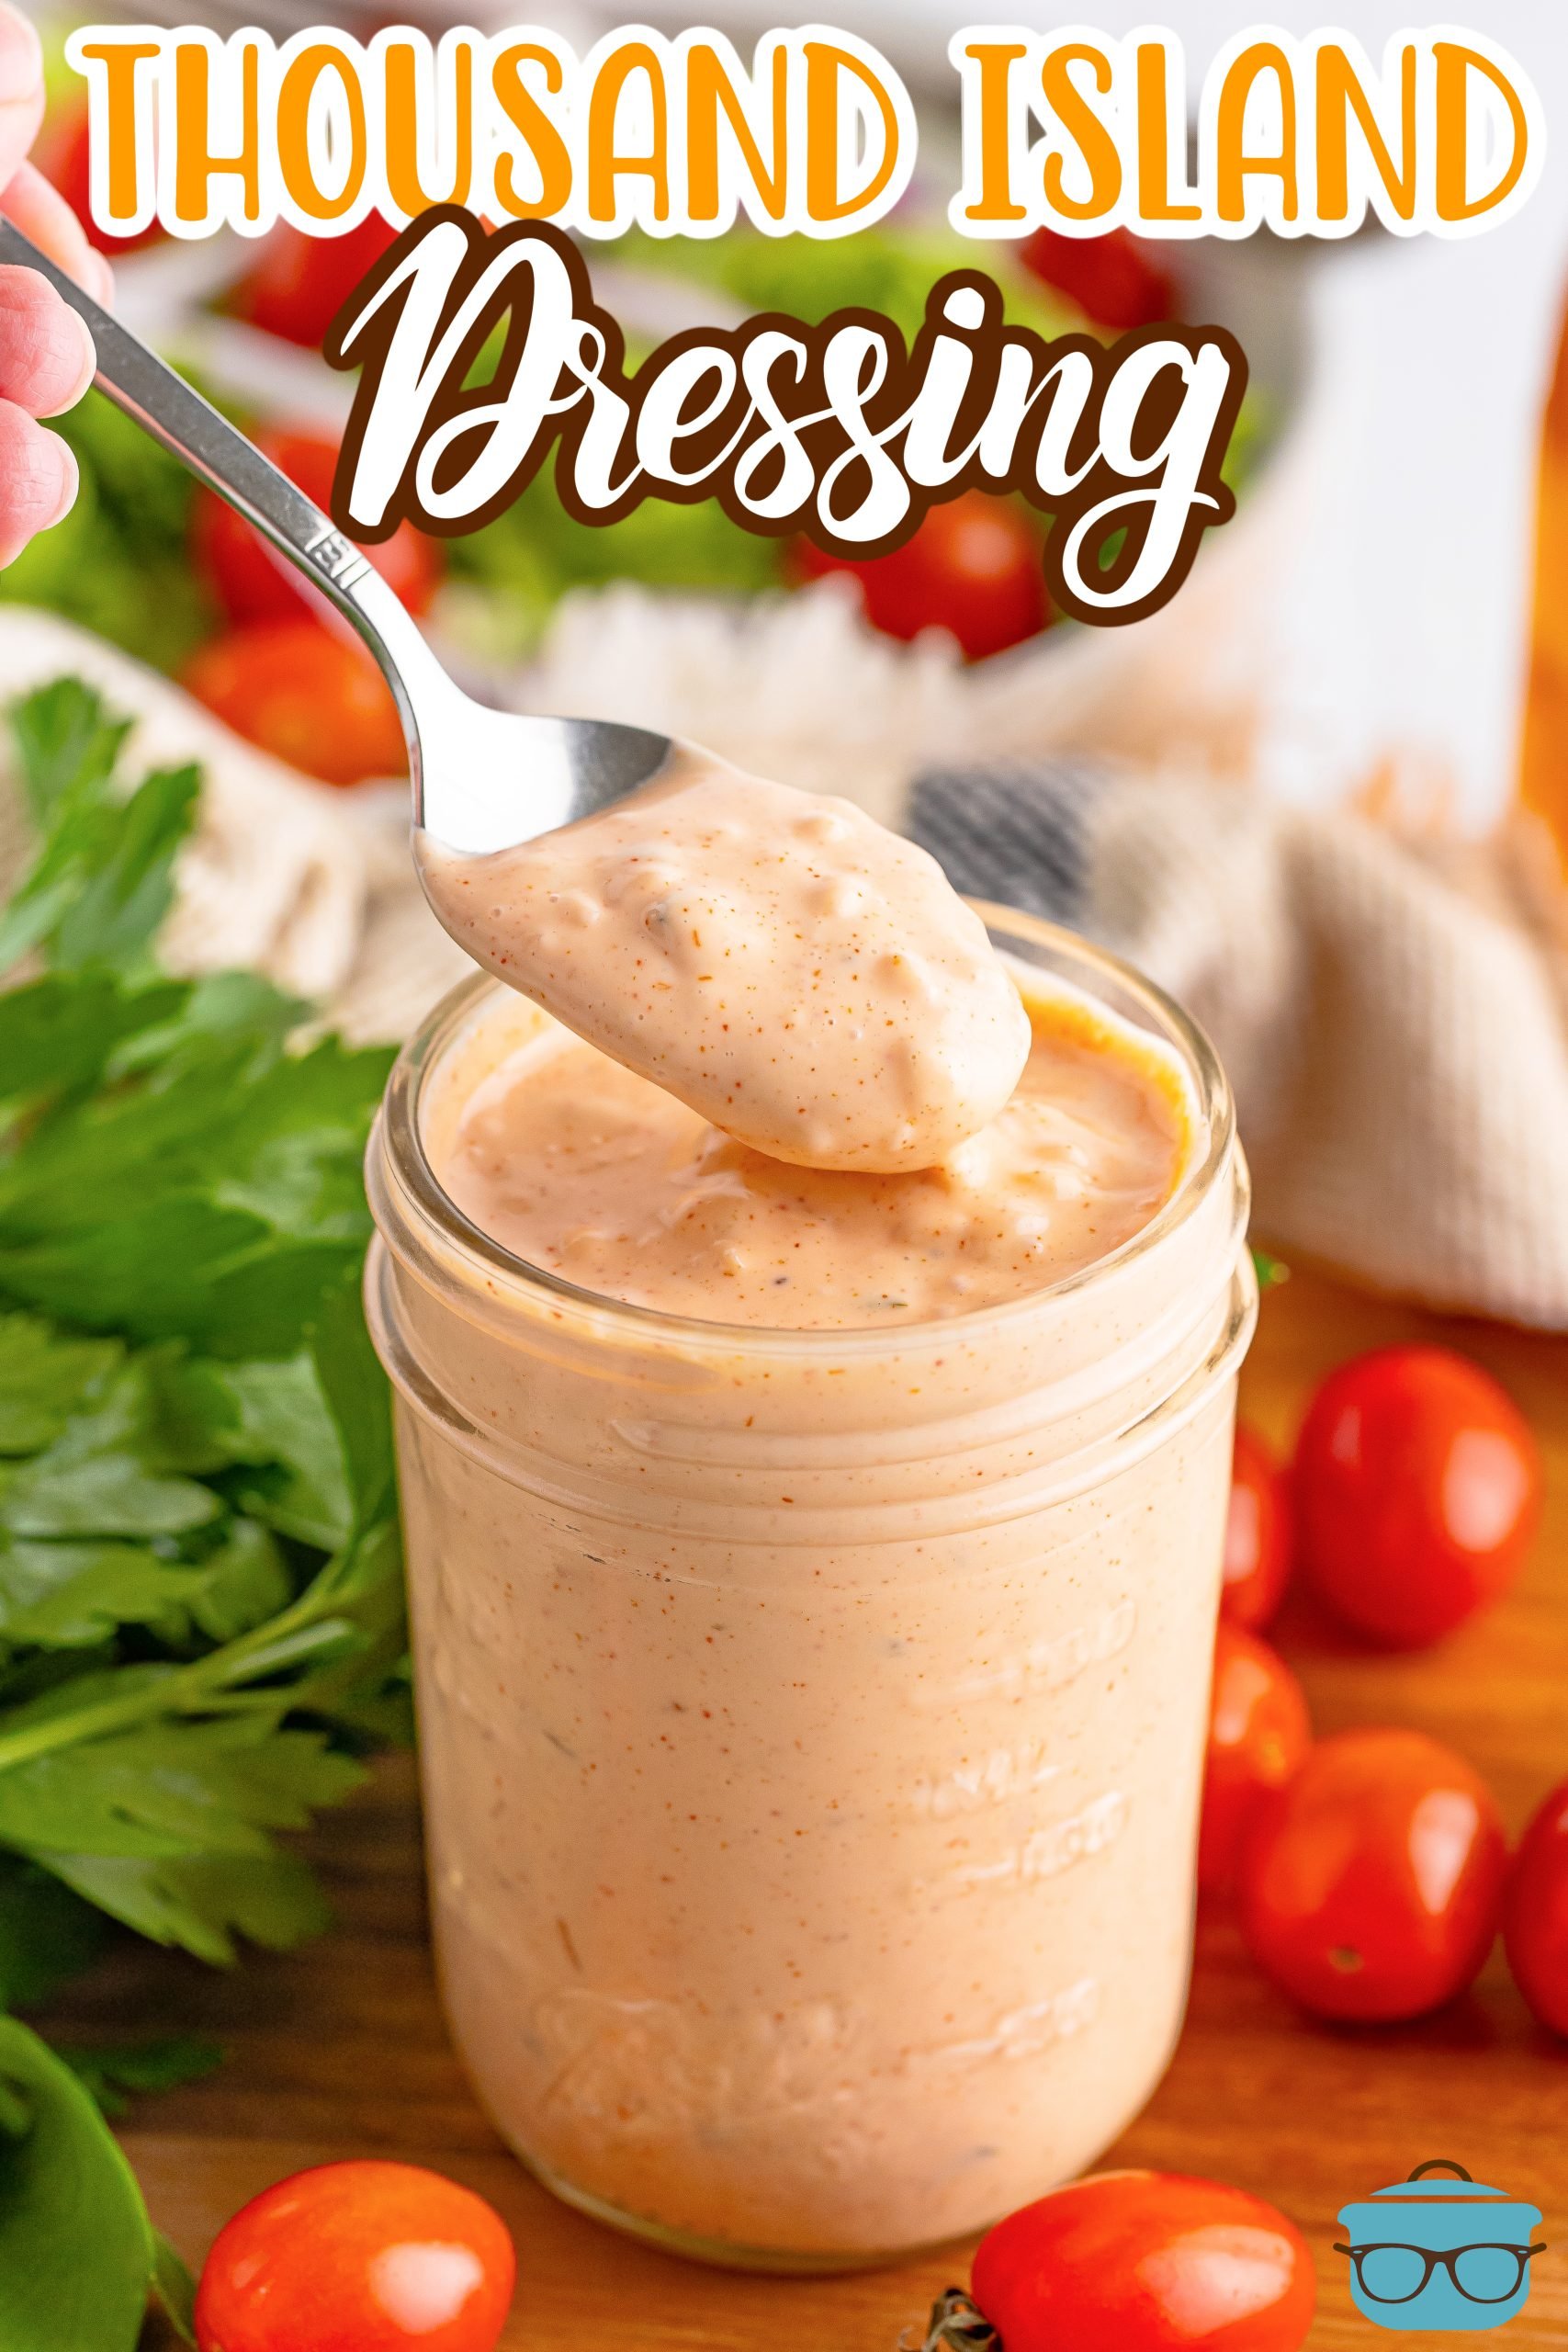 A jar of Thousand Island Dressing with a spoon removing some.